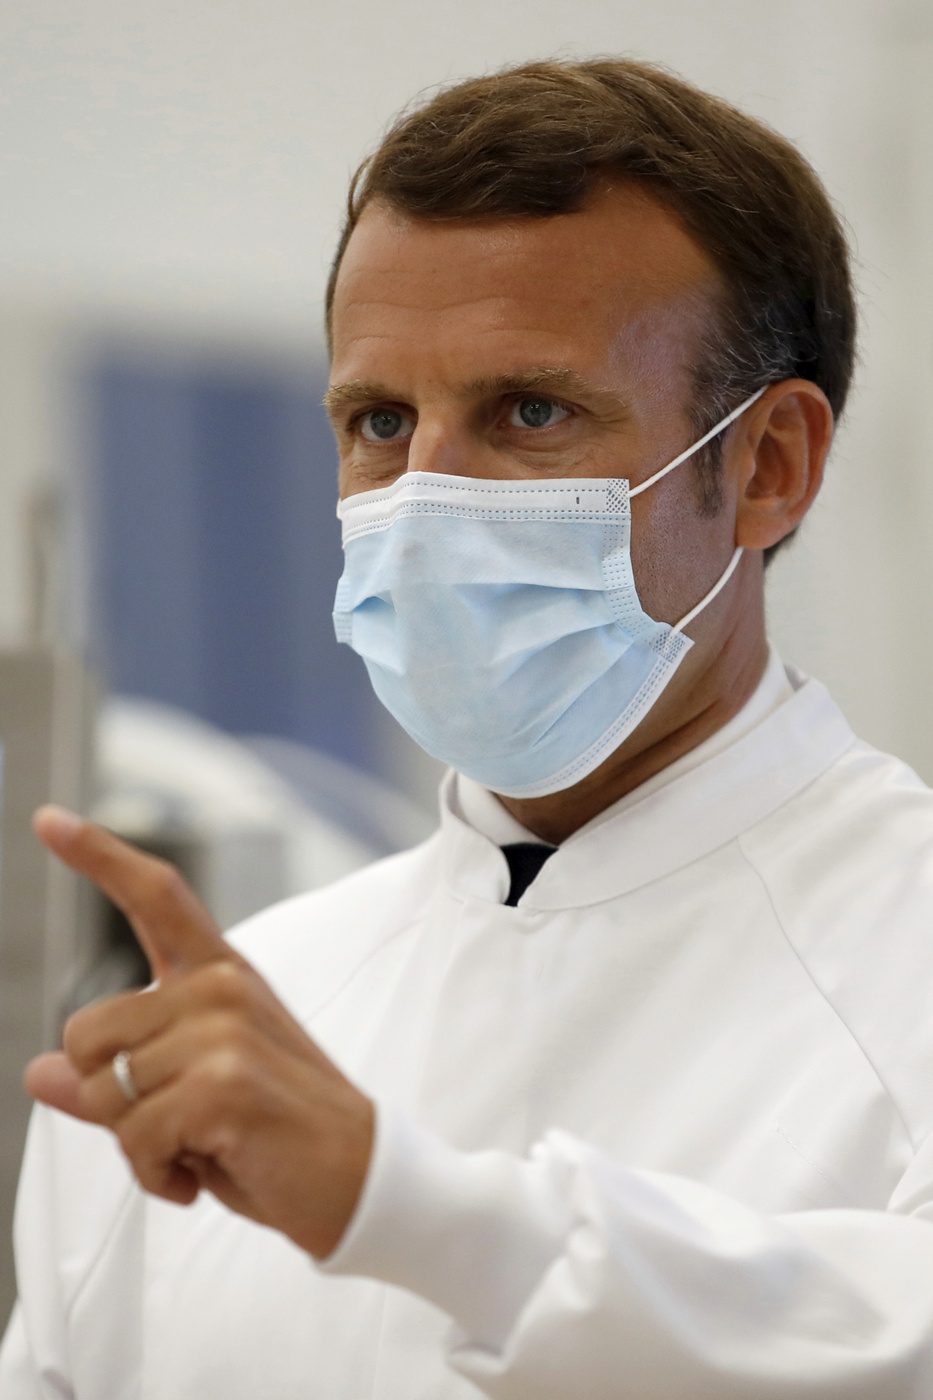 French President Emmanuel Macron visits an industrial development laboratory at the French drugmaker's vaccine unit Sanofi Pasteur plant in Marcy-l'Etoile, near Lyon, central France, Tuesday, June 16, 2020. The visit comes after rival pharmaceutical company AstraZeneca this weekend announced a deal to supply 400 million vaccine doses to EU countries, including France. (Gonzalo Fuentes/Pool via AP)